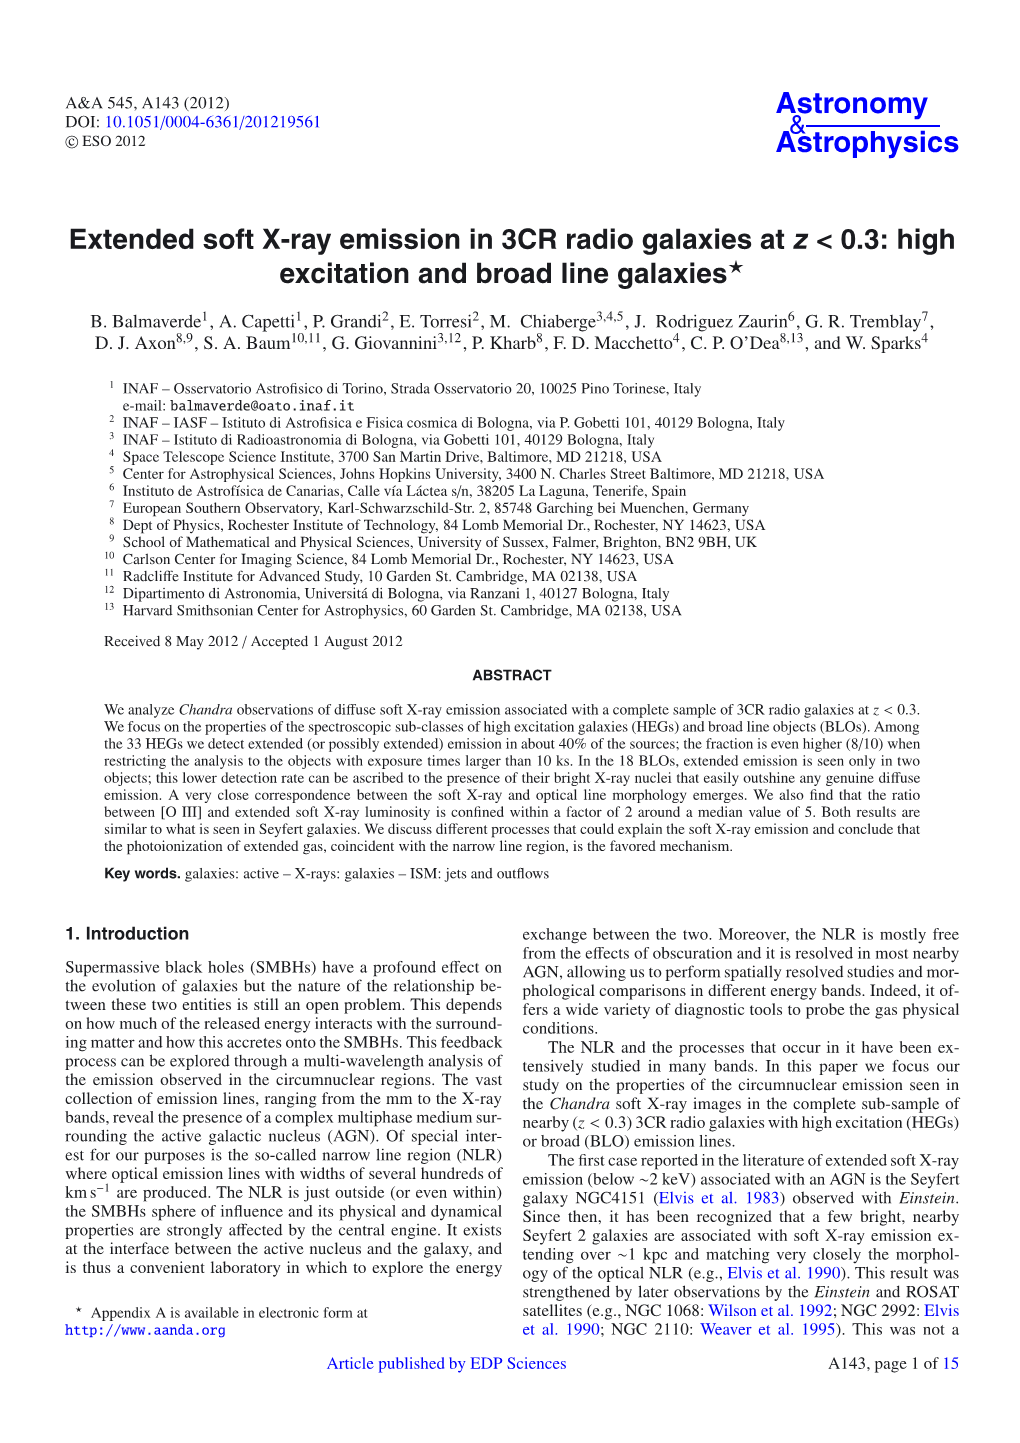 Extended Soft X-Ray Emission in 3CR Radio Galaxies at Z